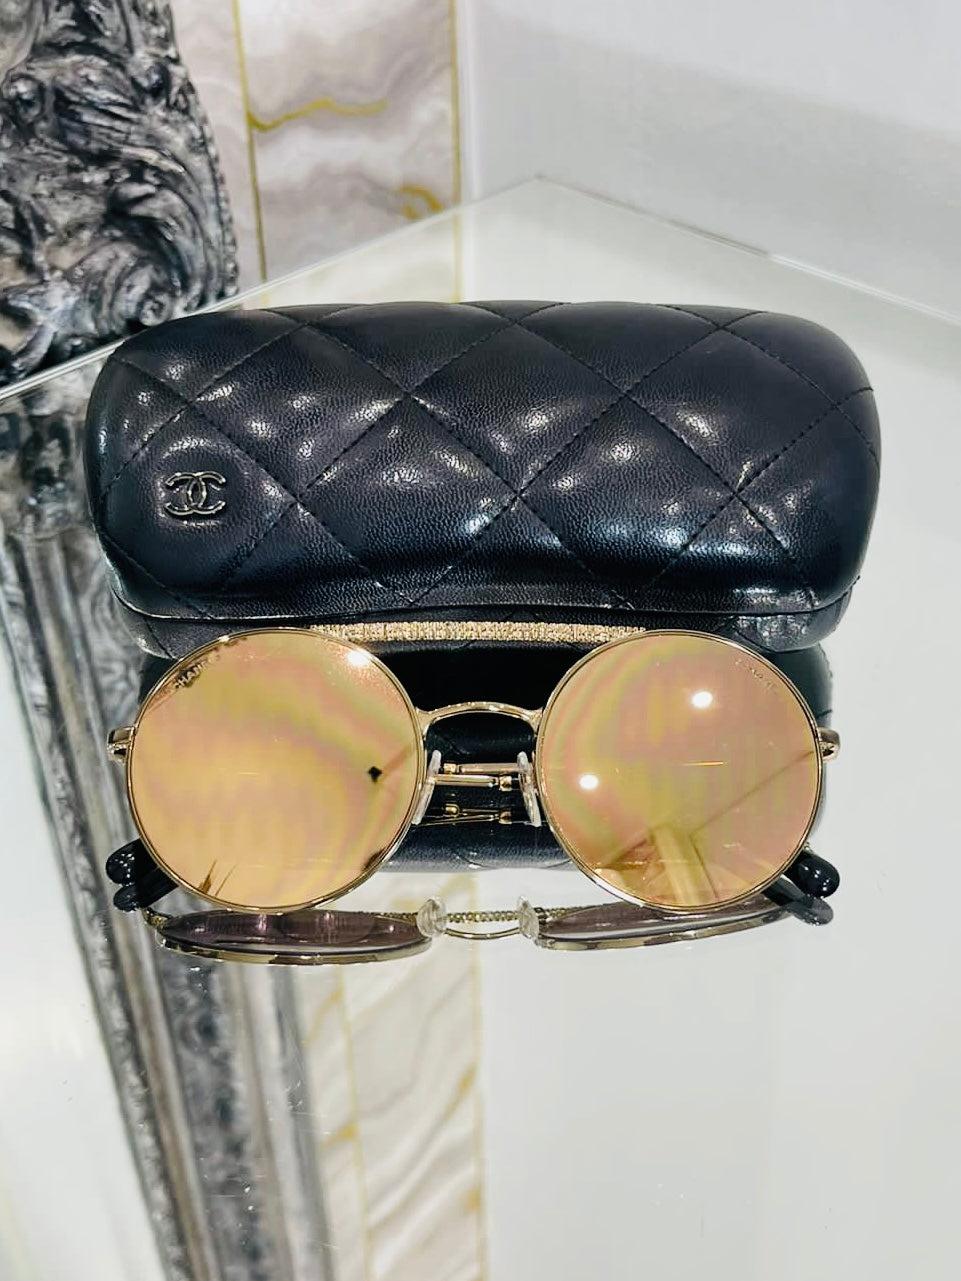 Chanel Mirrored Round Sunglasses

Gold textured frames with mirror lenses and 'CC' logo to each arm.

Additional information:
Size – O/S
Composition- Metal
Condition – Good (There is a small issue/mark/crack with the bottom of one lens)
Comes with-